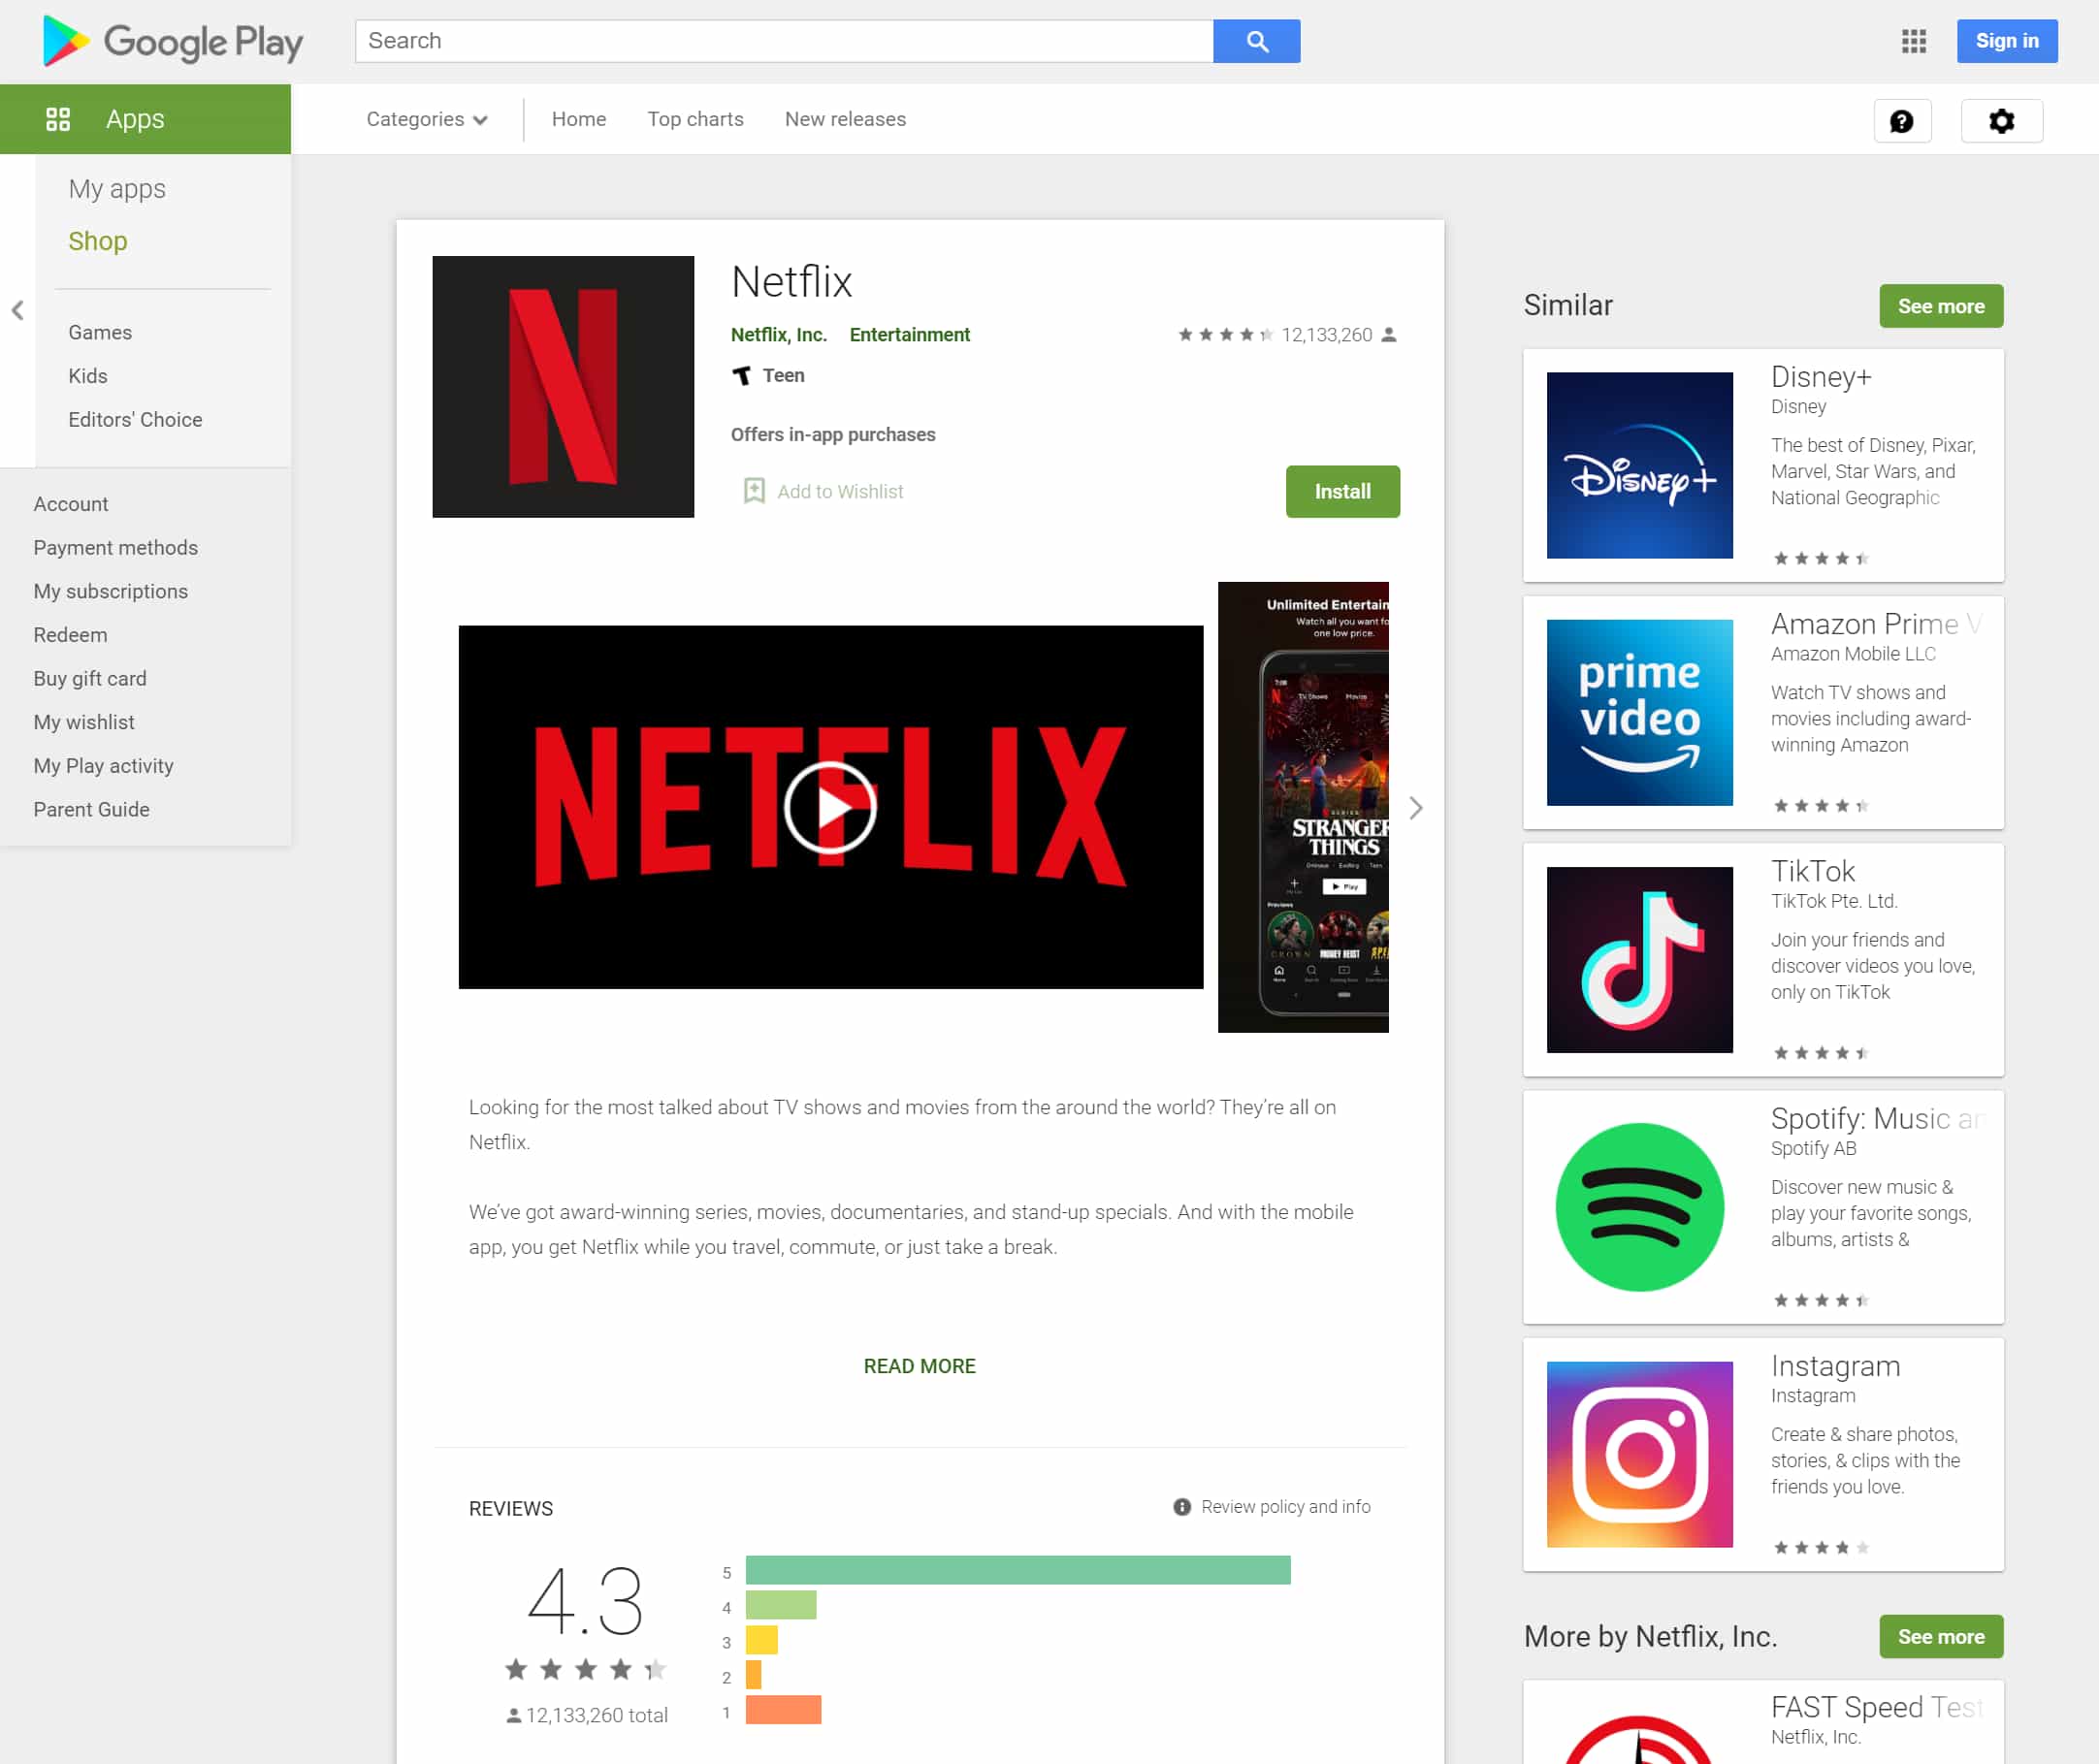 Example with product_id: com.netflix.mediaclient